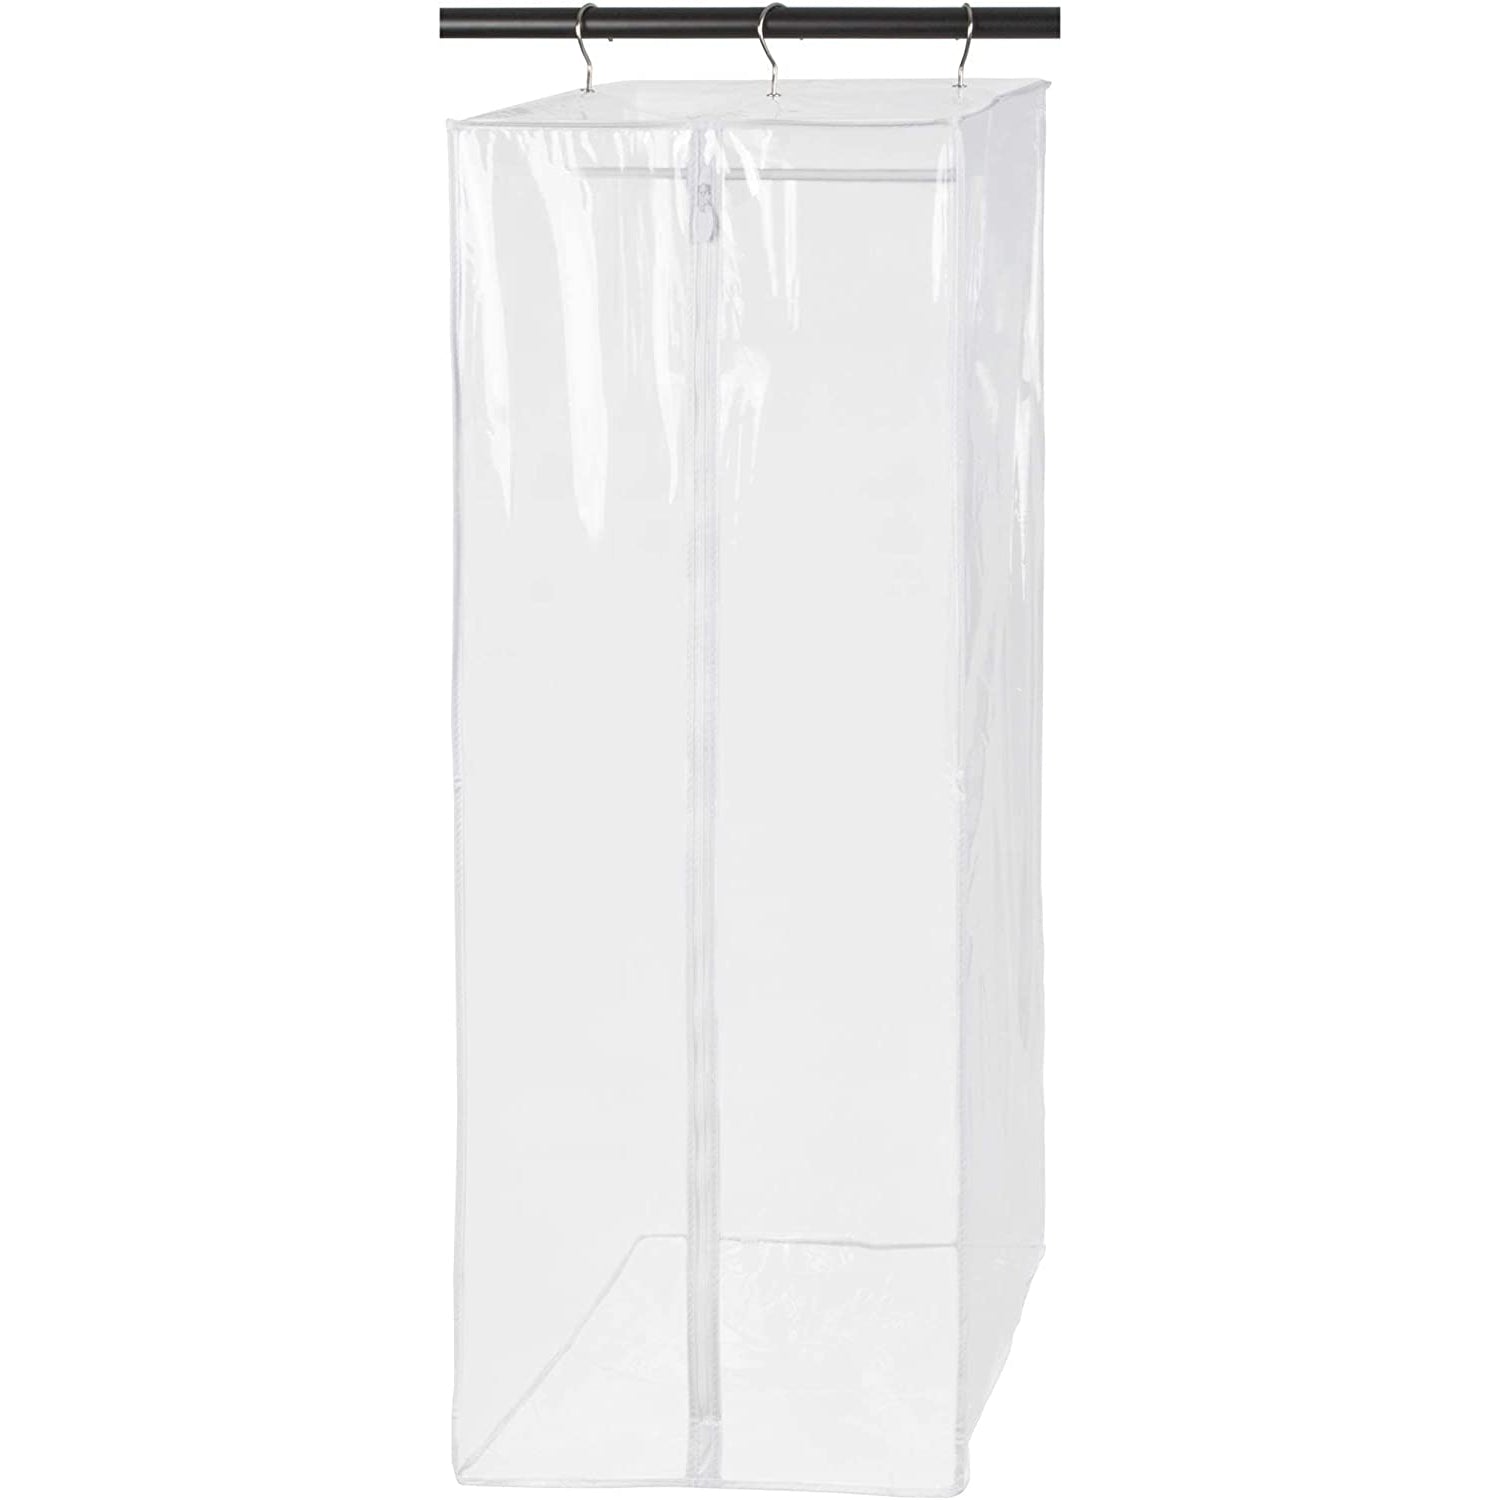 Garment Bag - Clear Hanging Closet Organizer - Durable Zippered Cover with Rod Protects Dresses, Suits, and Jackets from Dust and Moist- Top Metal Frame to Keep All Your Stuff in Shape- 42" x 20" x 15